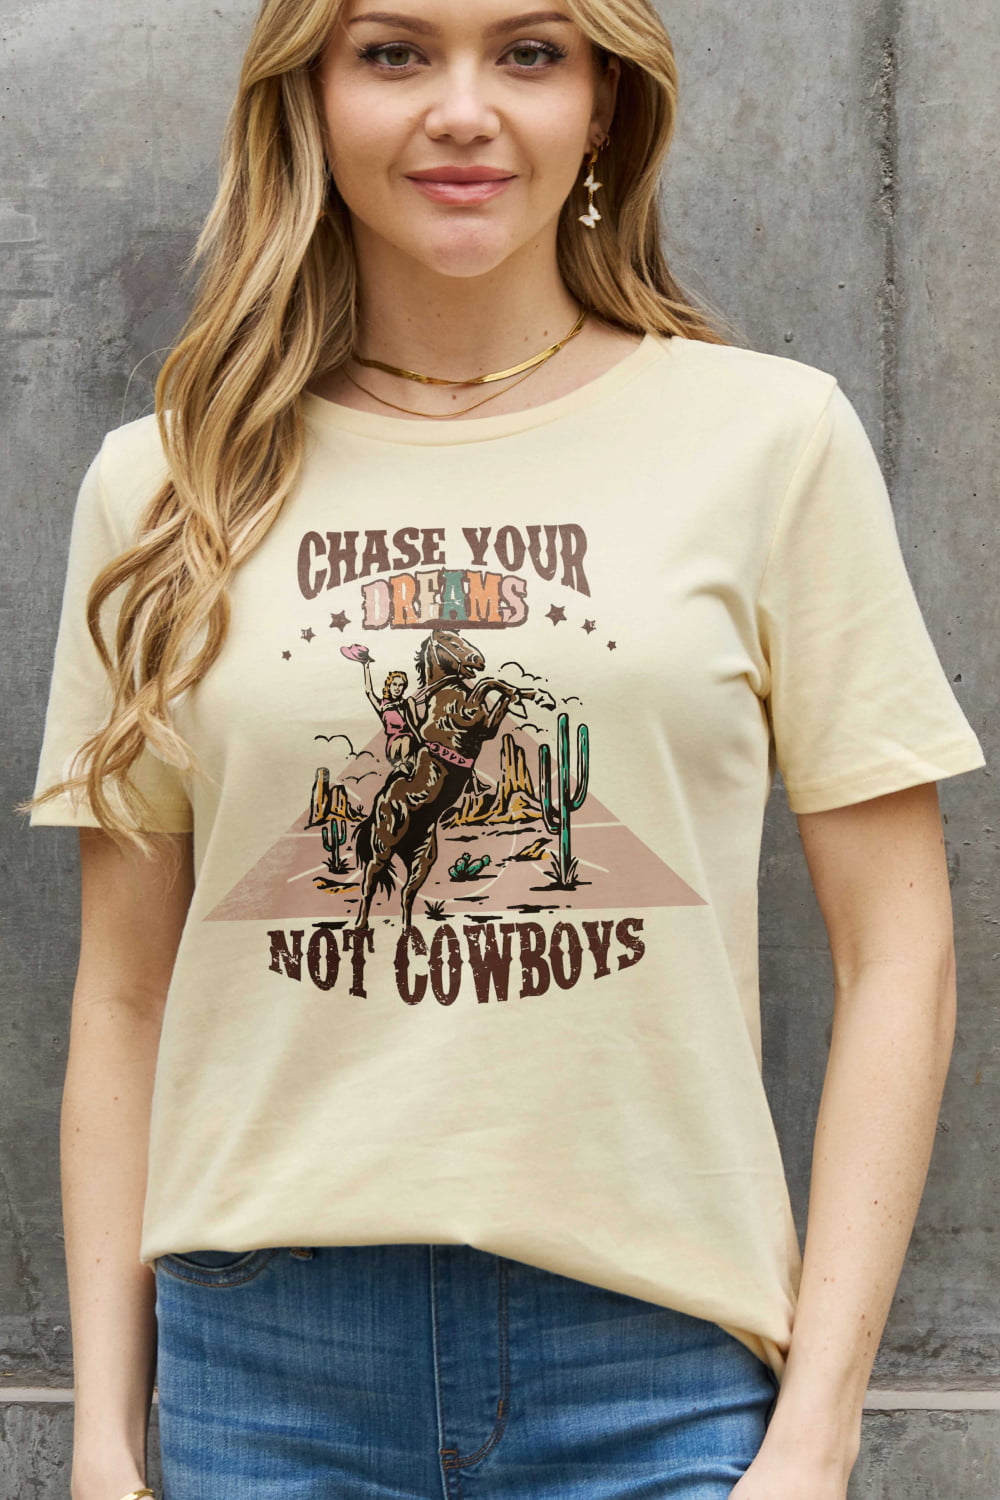 Full Size CHASE YOUR DREAMS NOT COWBOYS Graphic Cotton Tee